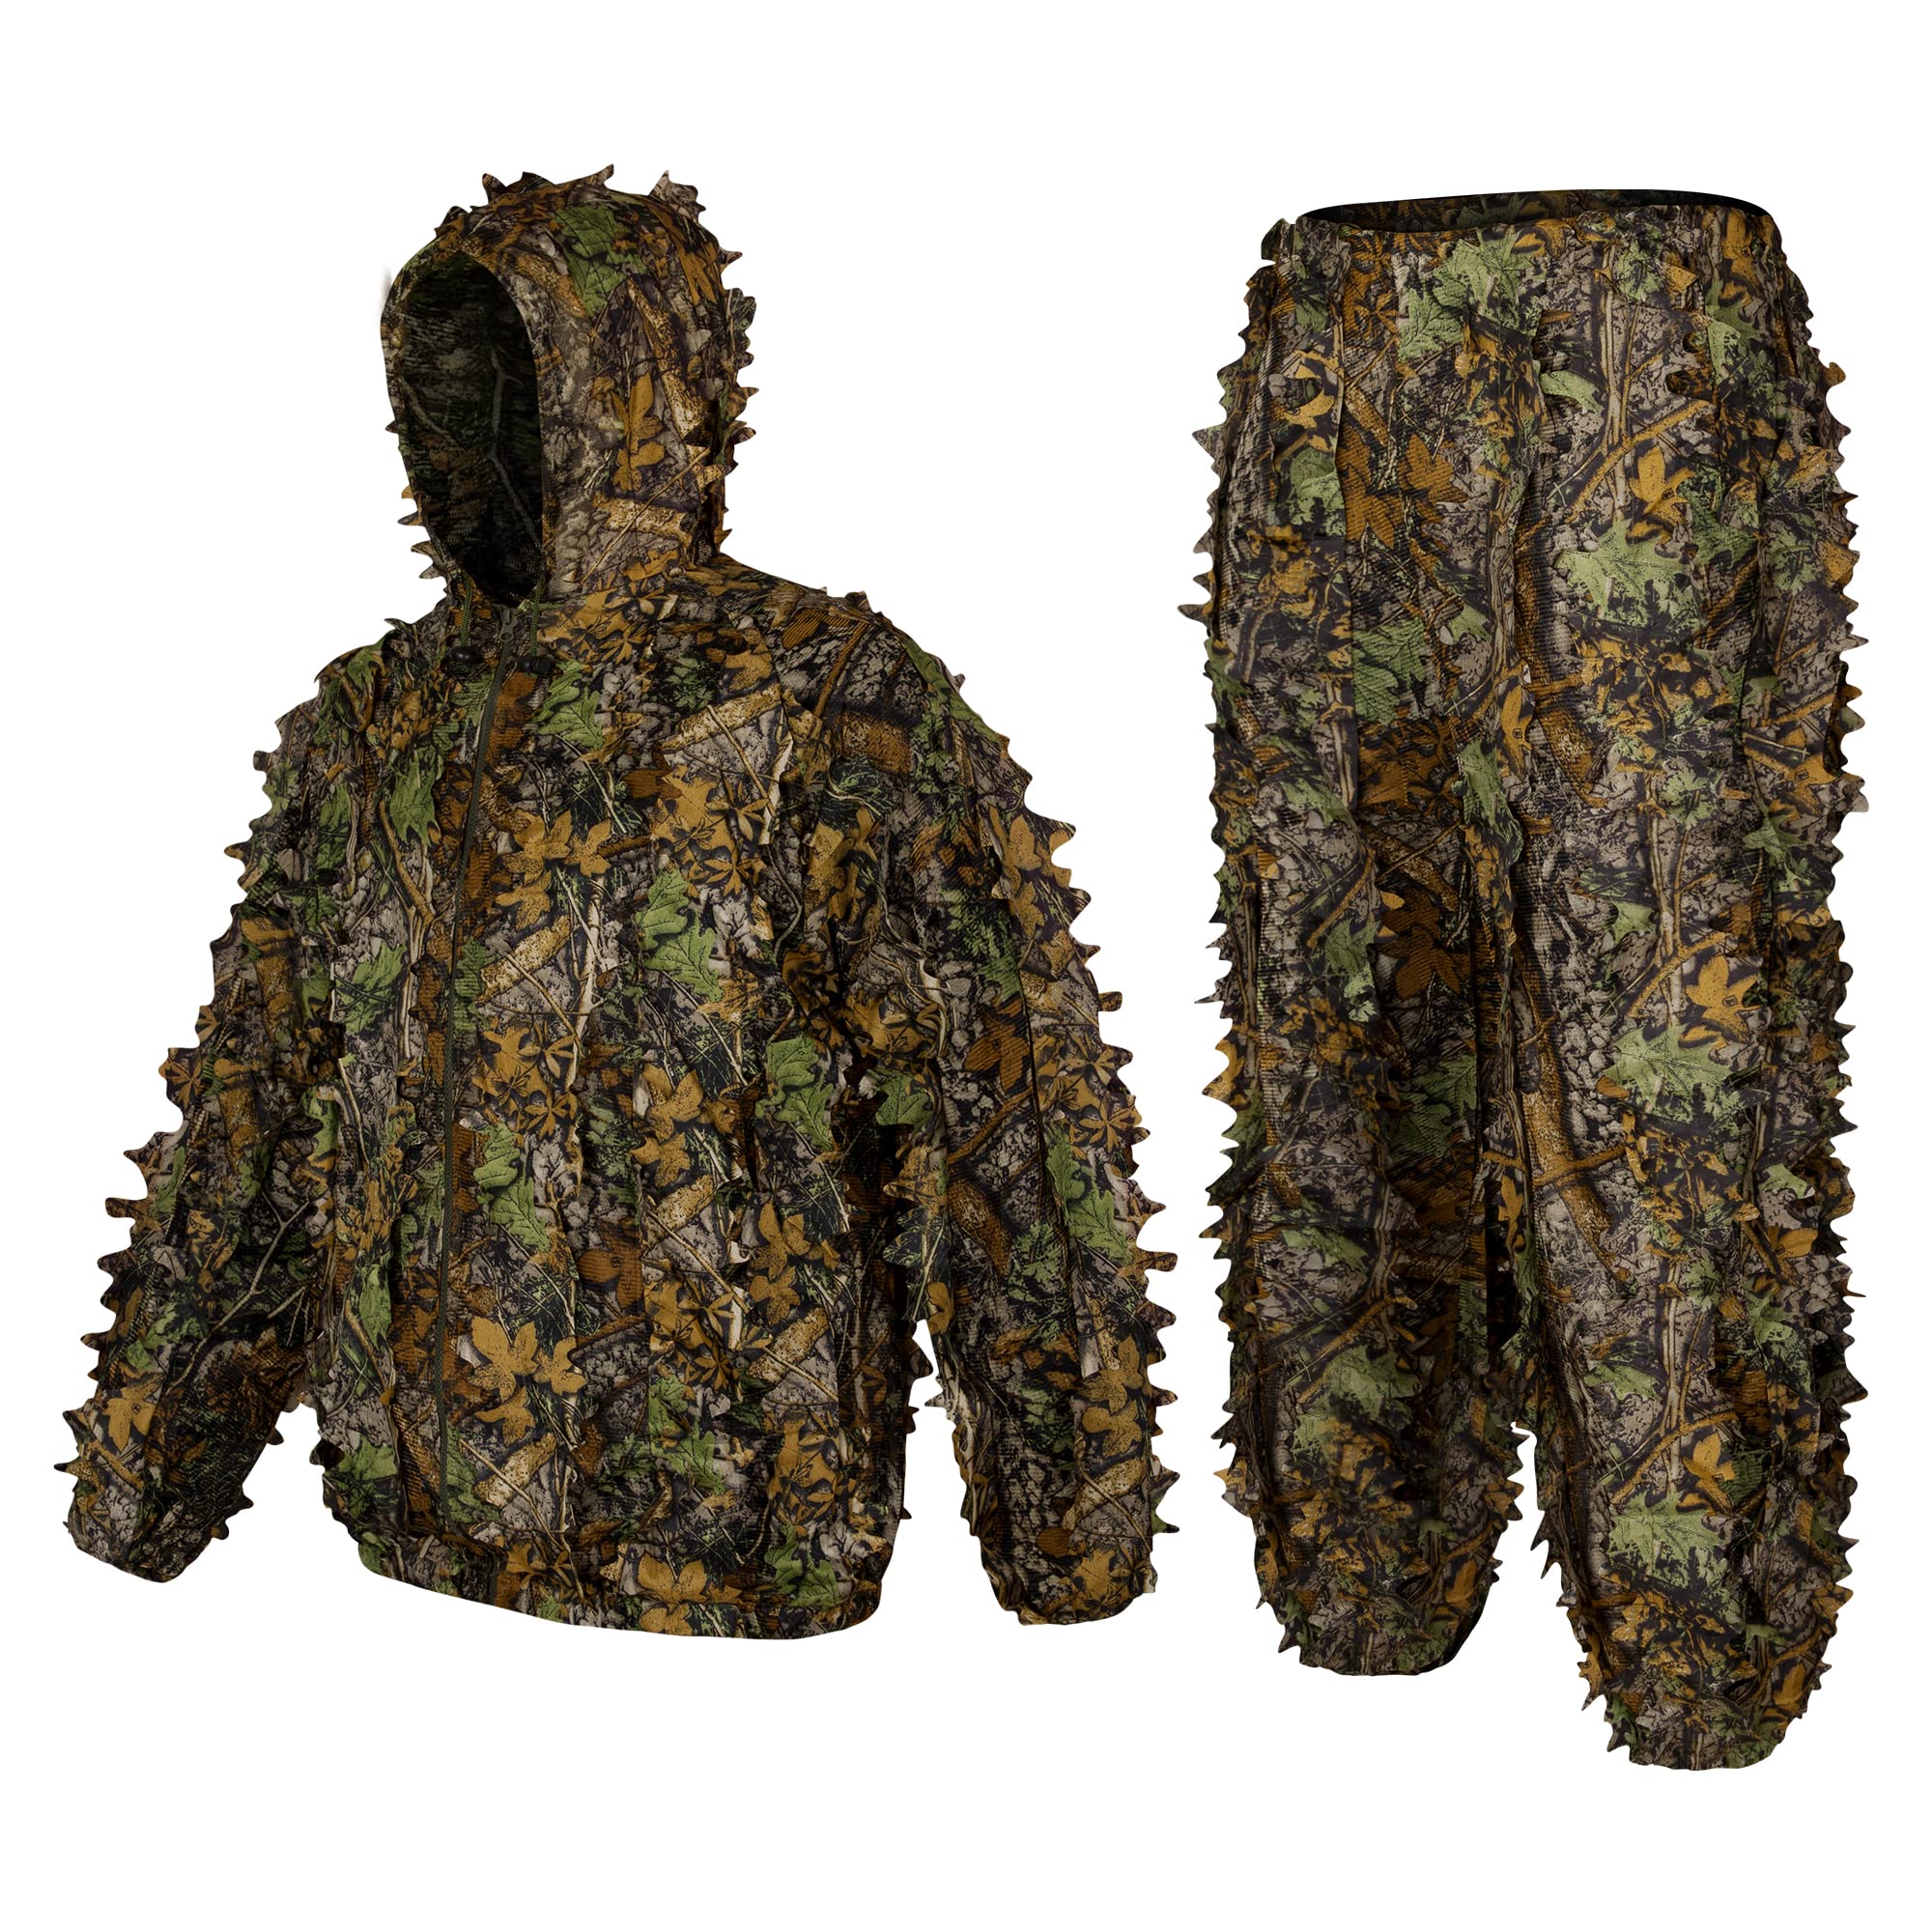 Ginsco 3D Leaf Woodland Ghillie Suit Camouflage Clothing for Outdoor Woodland, Sniper Costume Camo Outfit for Jungle Hunting, Military Game, Wildlife Photography, Halloween